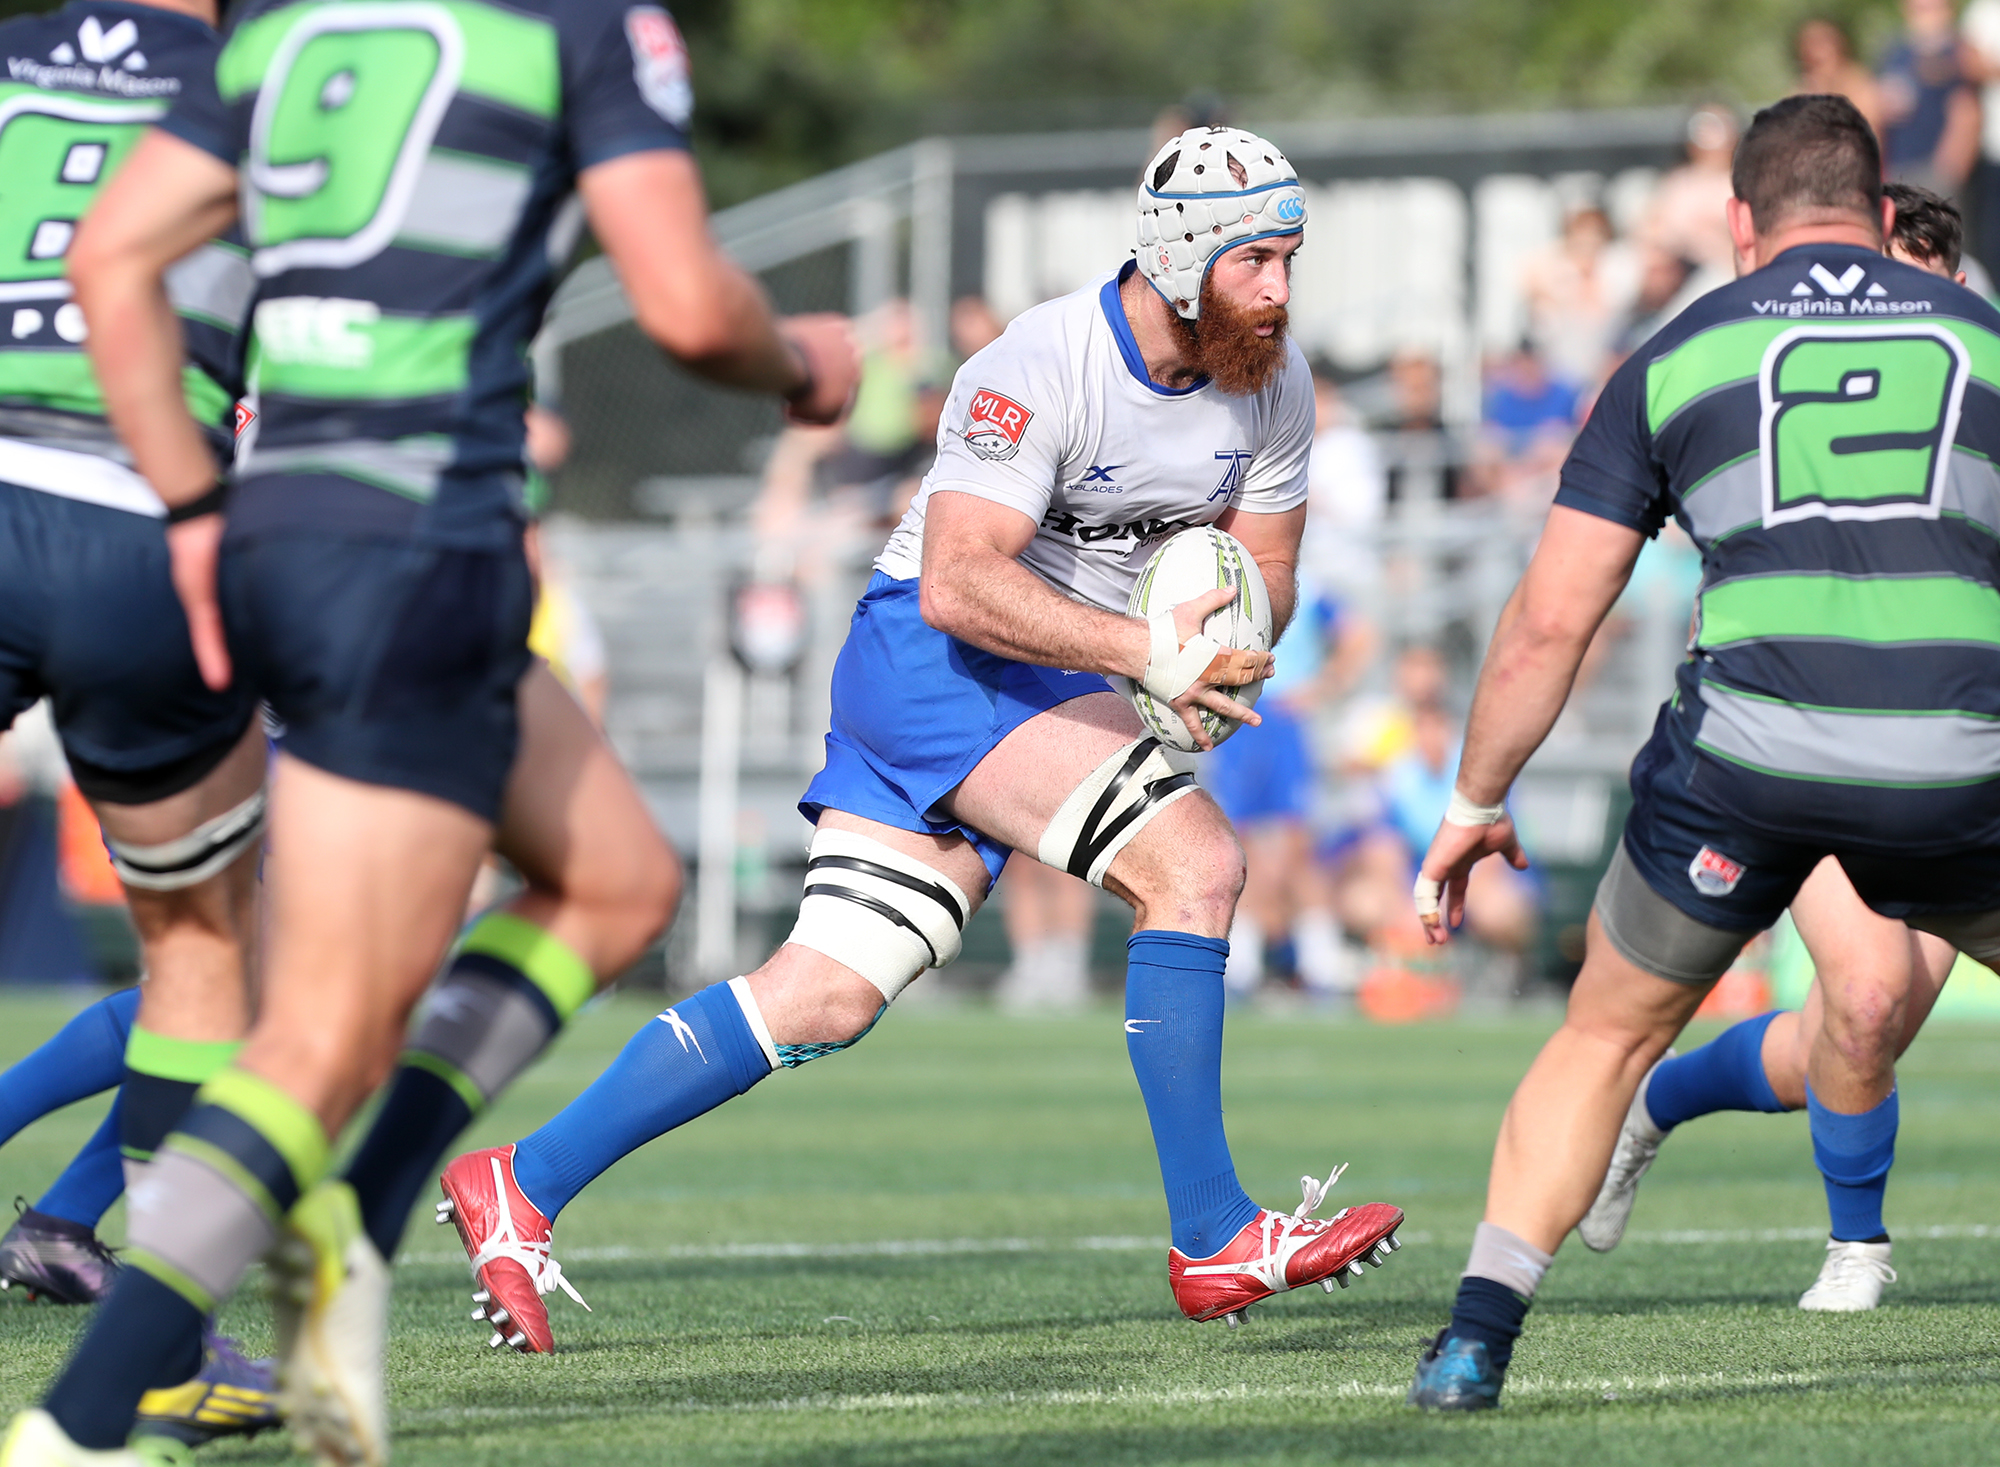 Seven Arrows Named to Canada’s Rugby World Cup Roster